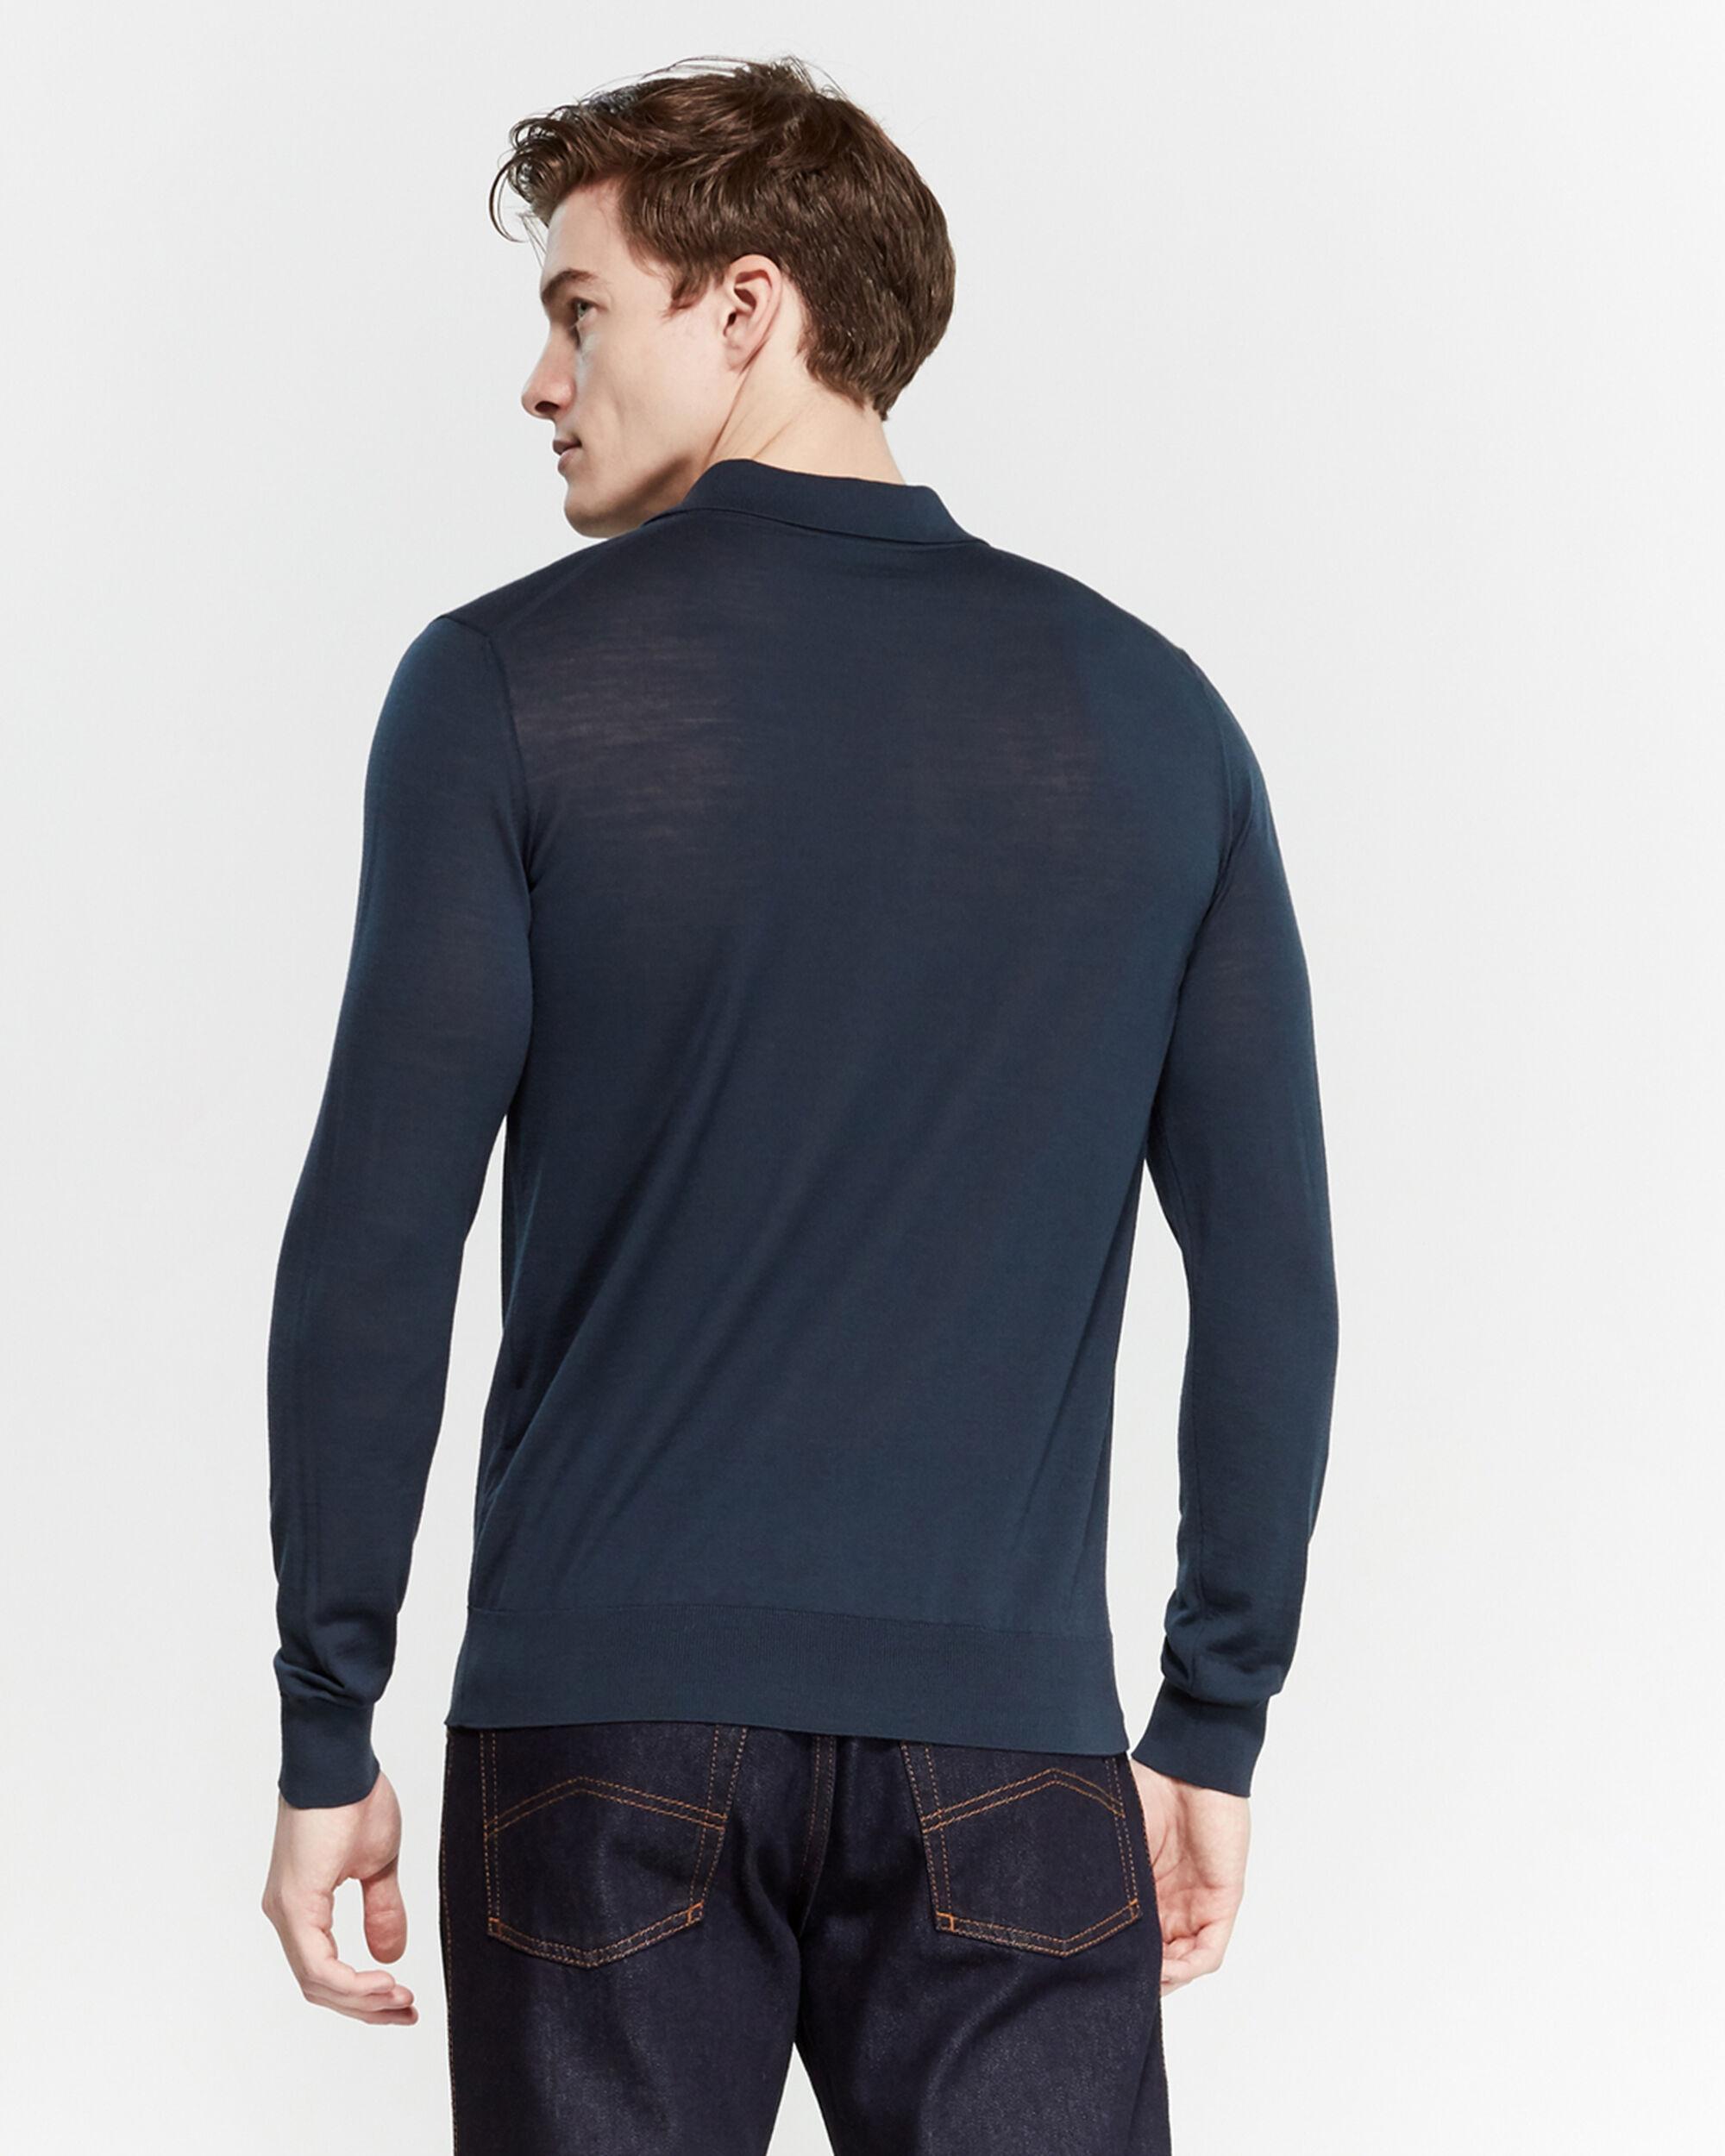 Giorgio Armani Wool Long Sleeve Knit Polo in Navy (Blue) for Men - Lyst